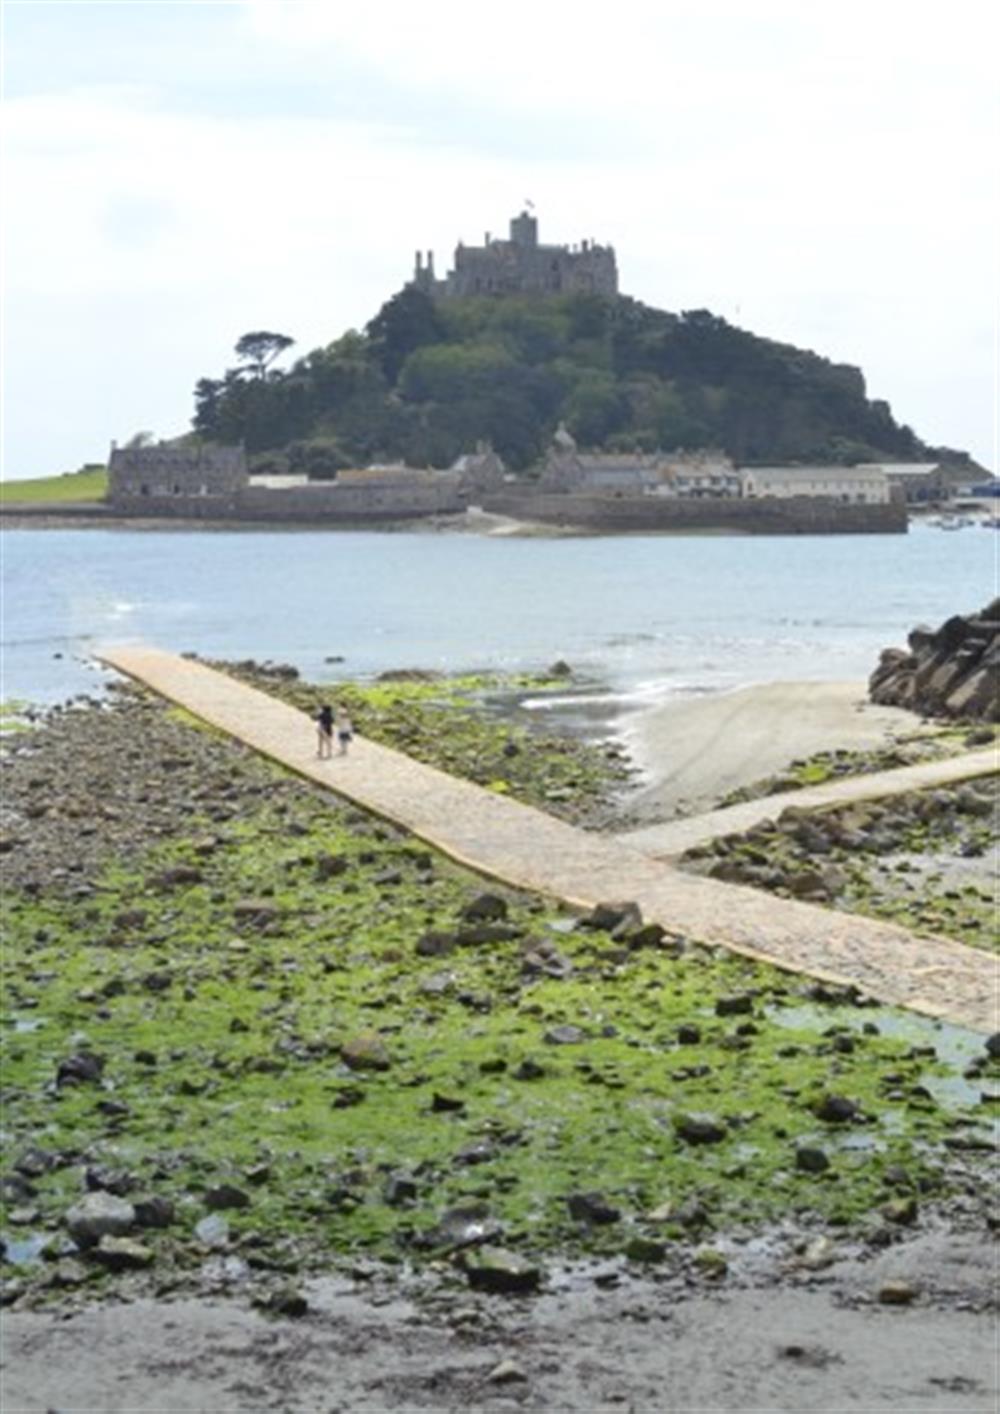 St Michael's Mount is just a 45 minute drive. Walk across the causeway (if the tide is out!) or catch the boat across. at 30 Lower Stables in Maenporth